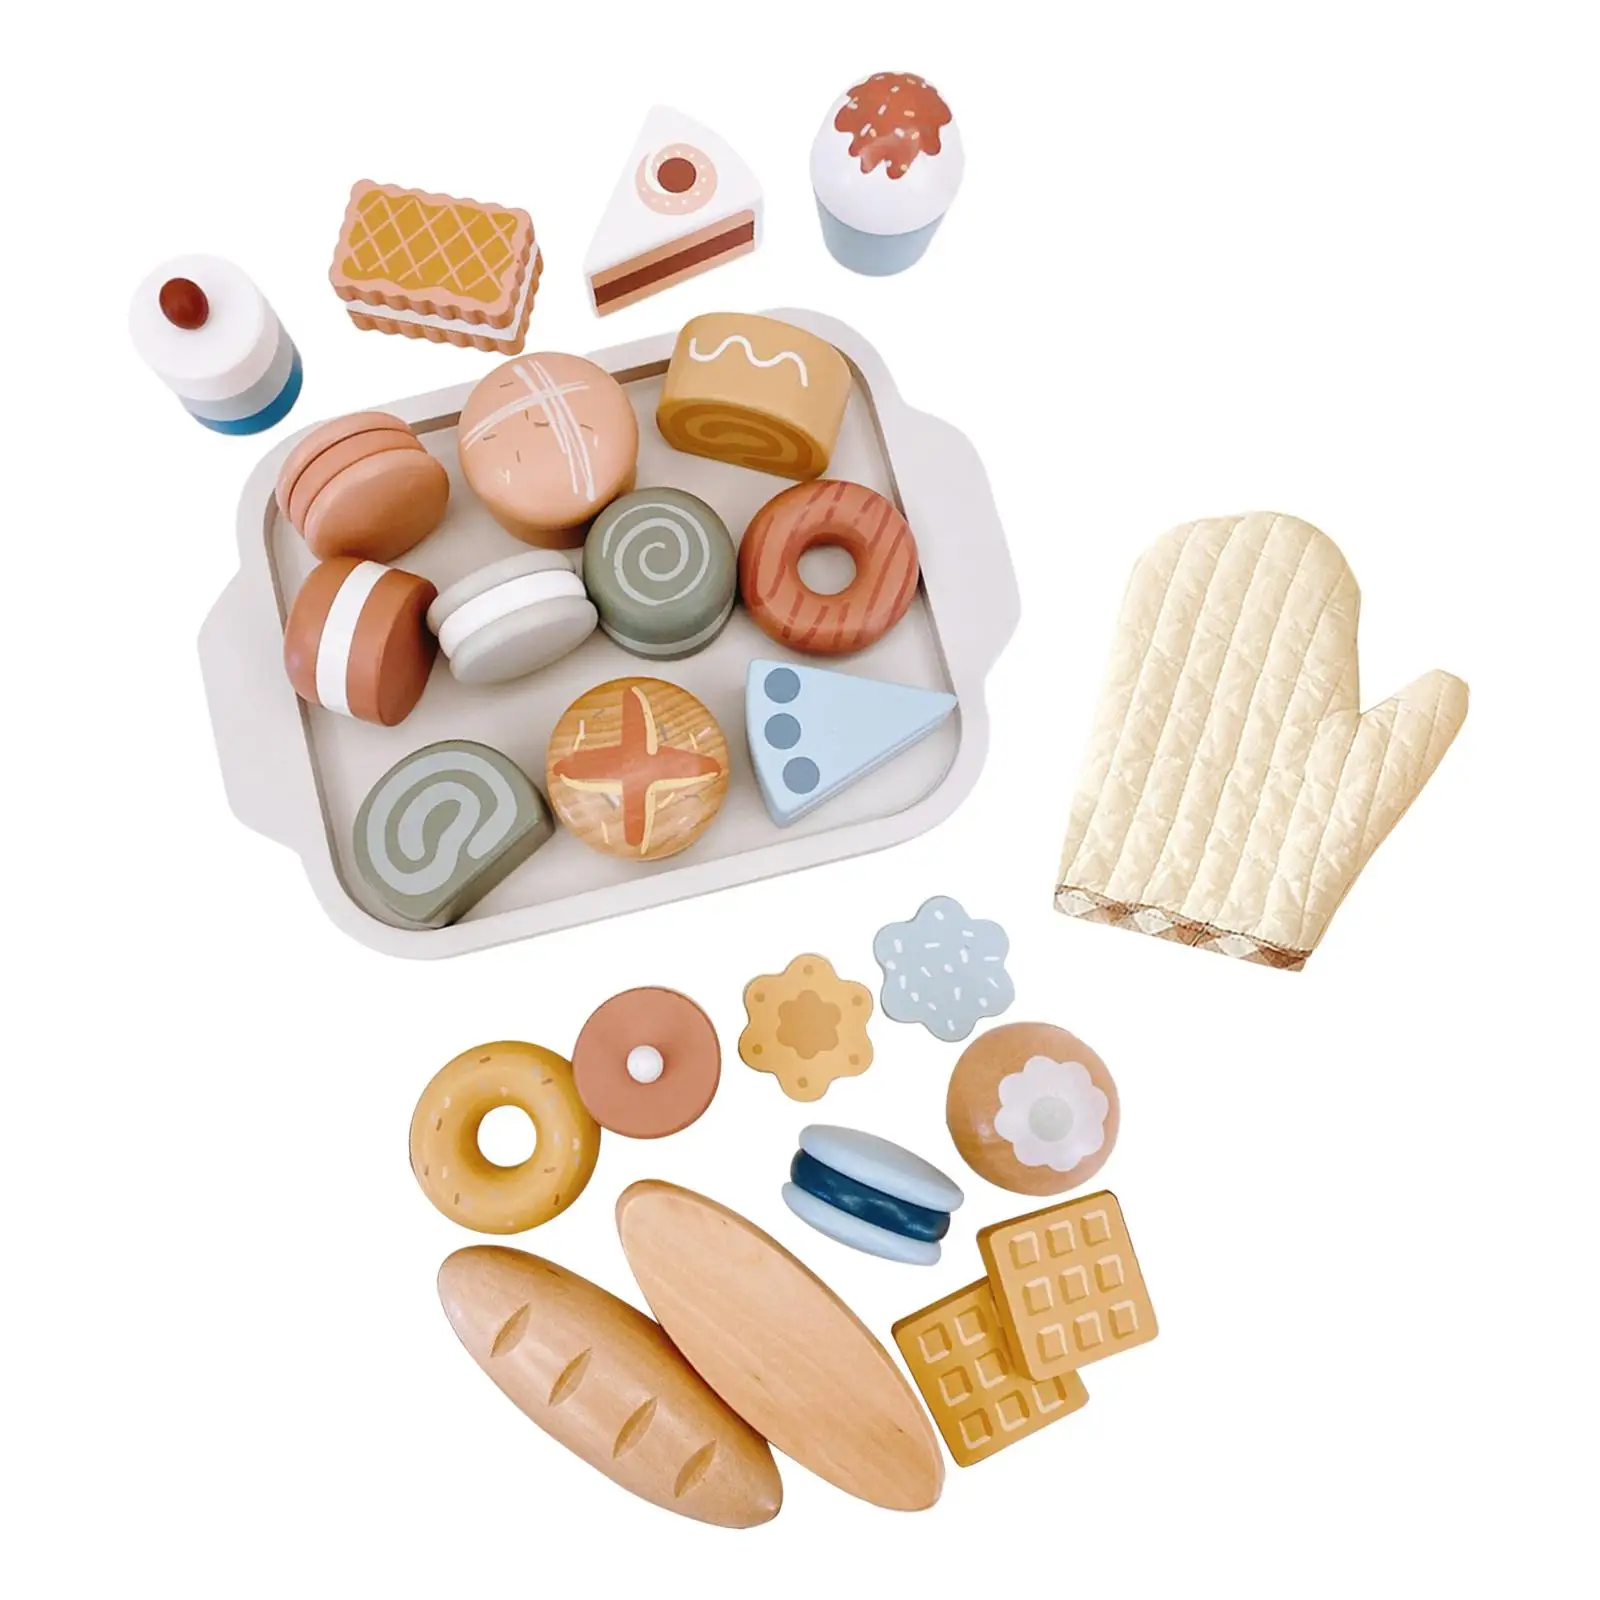 Cakes Play Set Toy Foods with Play Baking Cookies Early Learning Role Play Pretend Play Set Party Favors Handcraft